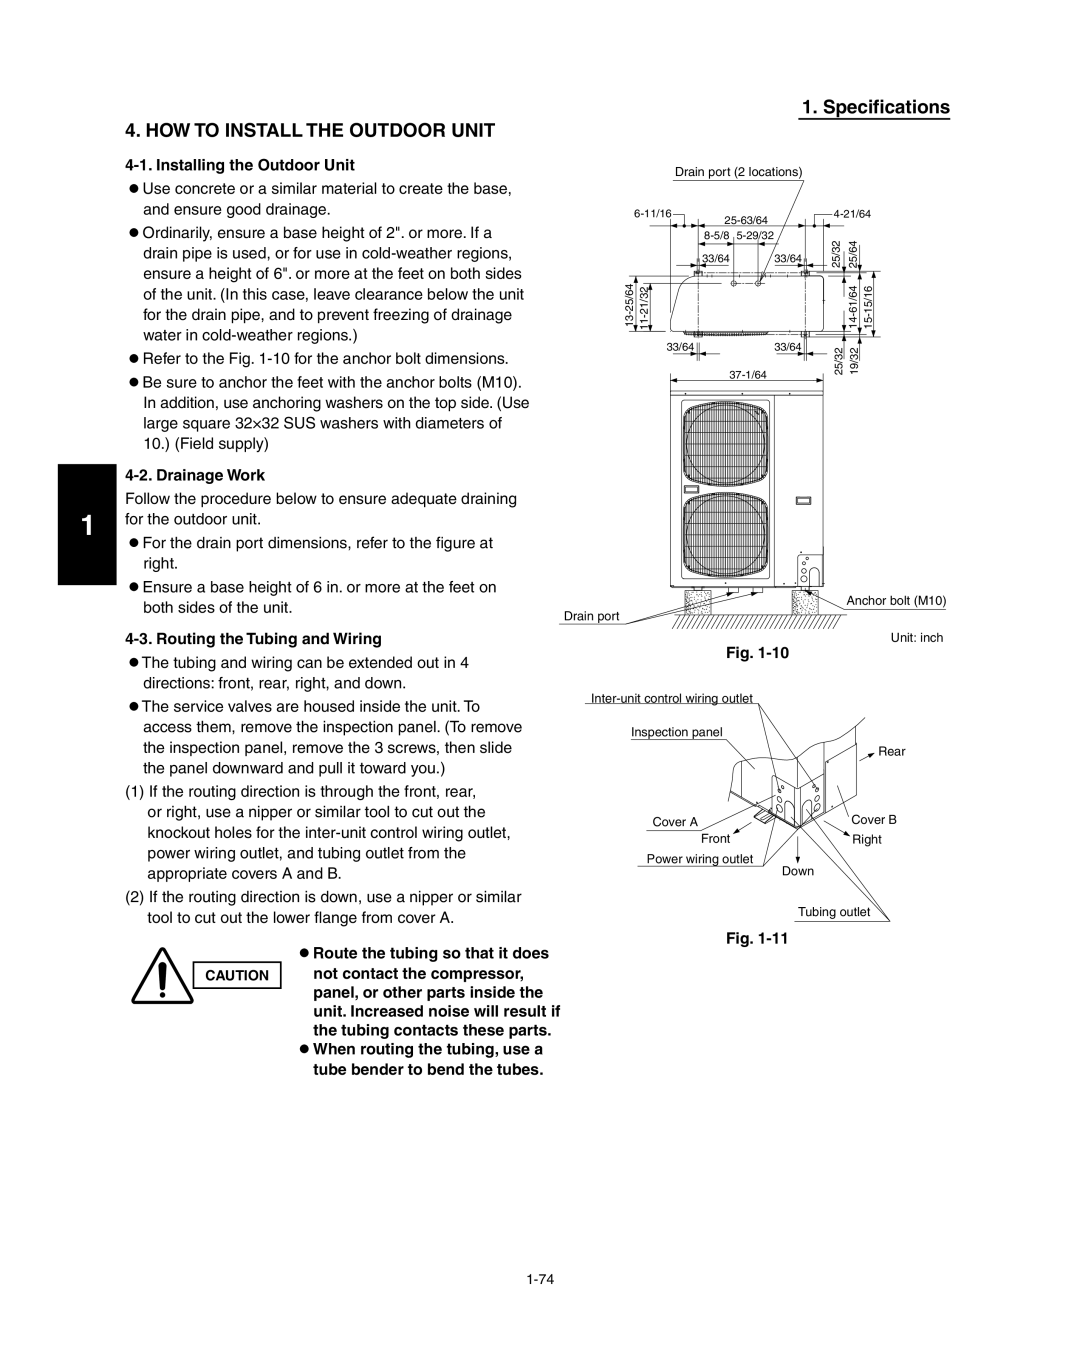 Panasonic R410A How To Install The Outdoor Unit, Specifications, Installing the Outdoor Unit, Drainage Work, Fig 